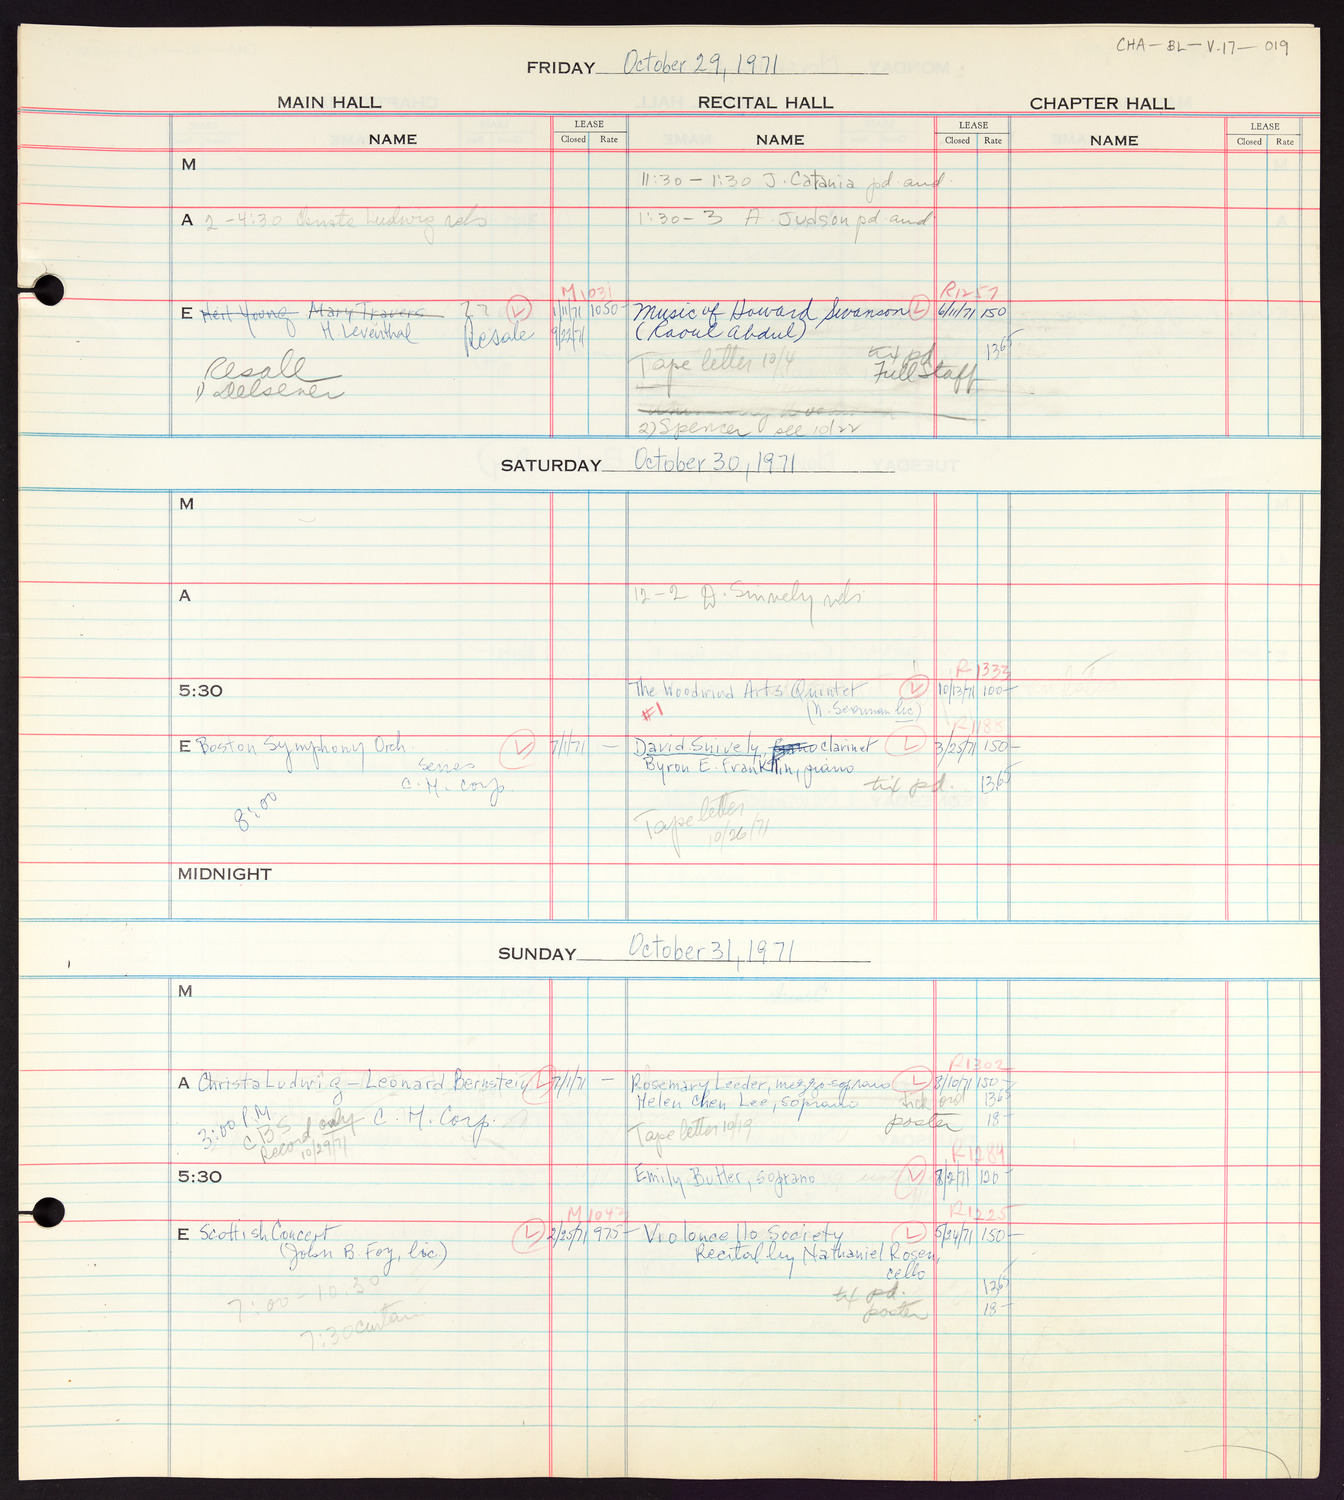 Carnegie Hall Booking Ledger, volume 17, page 19